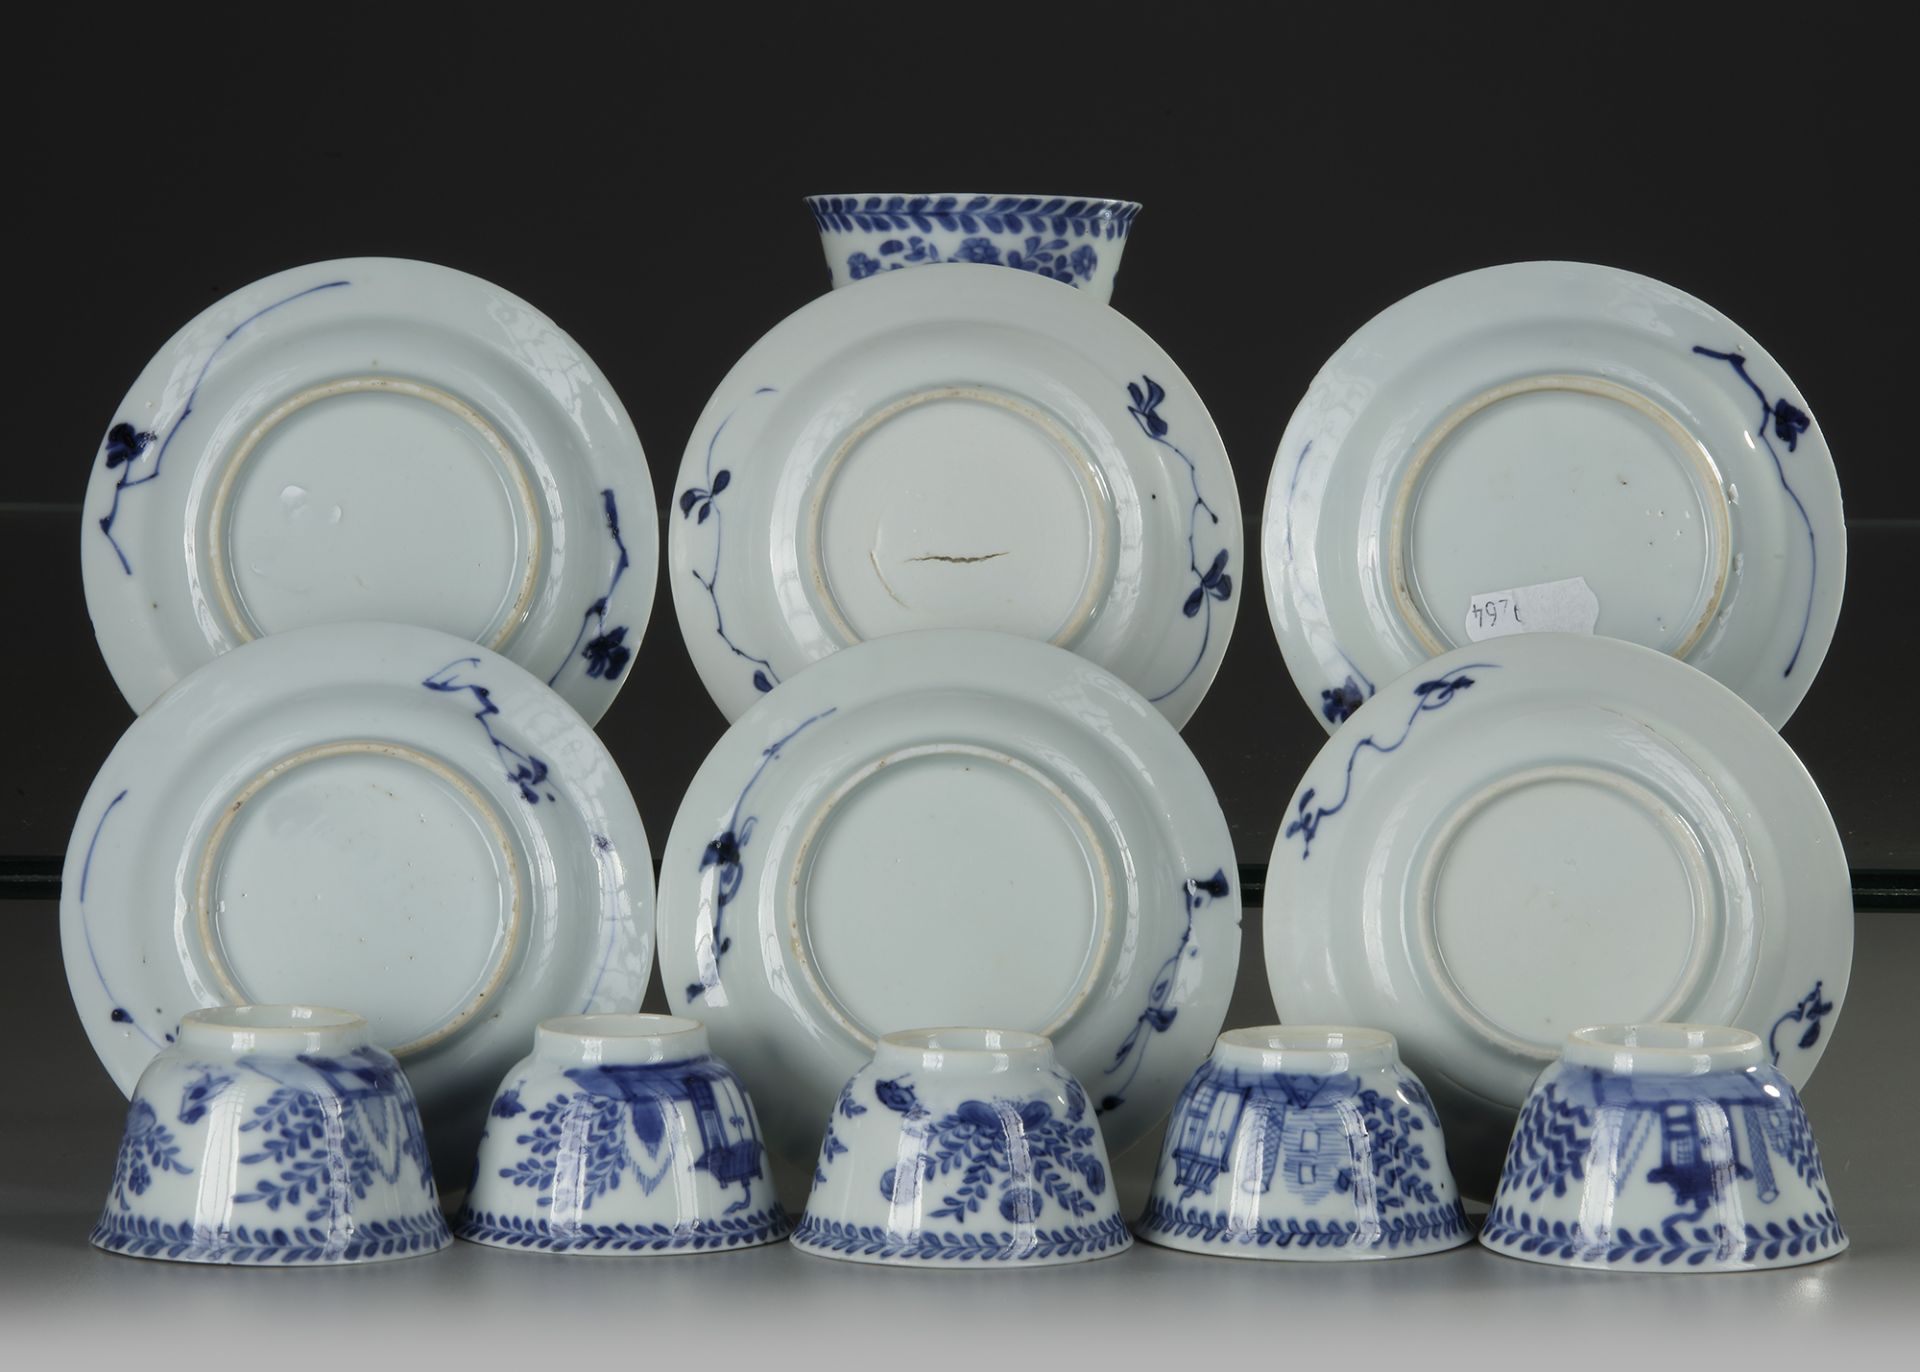 SIX CHINESE BLUE AND WHITE 'CUCKOO IN THE HOUSE' CUPS AND SAUCERS, 18TH CENTURY - Image 4 of 4